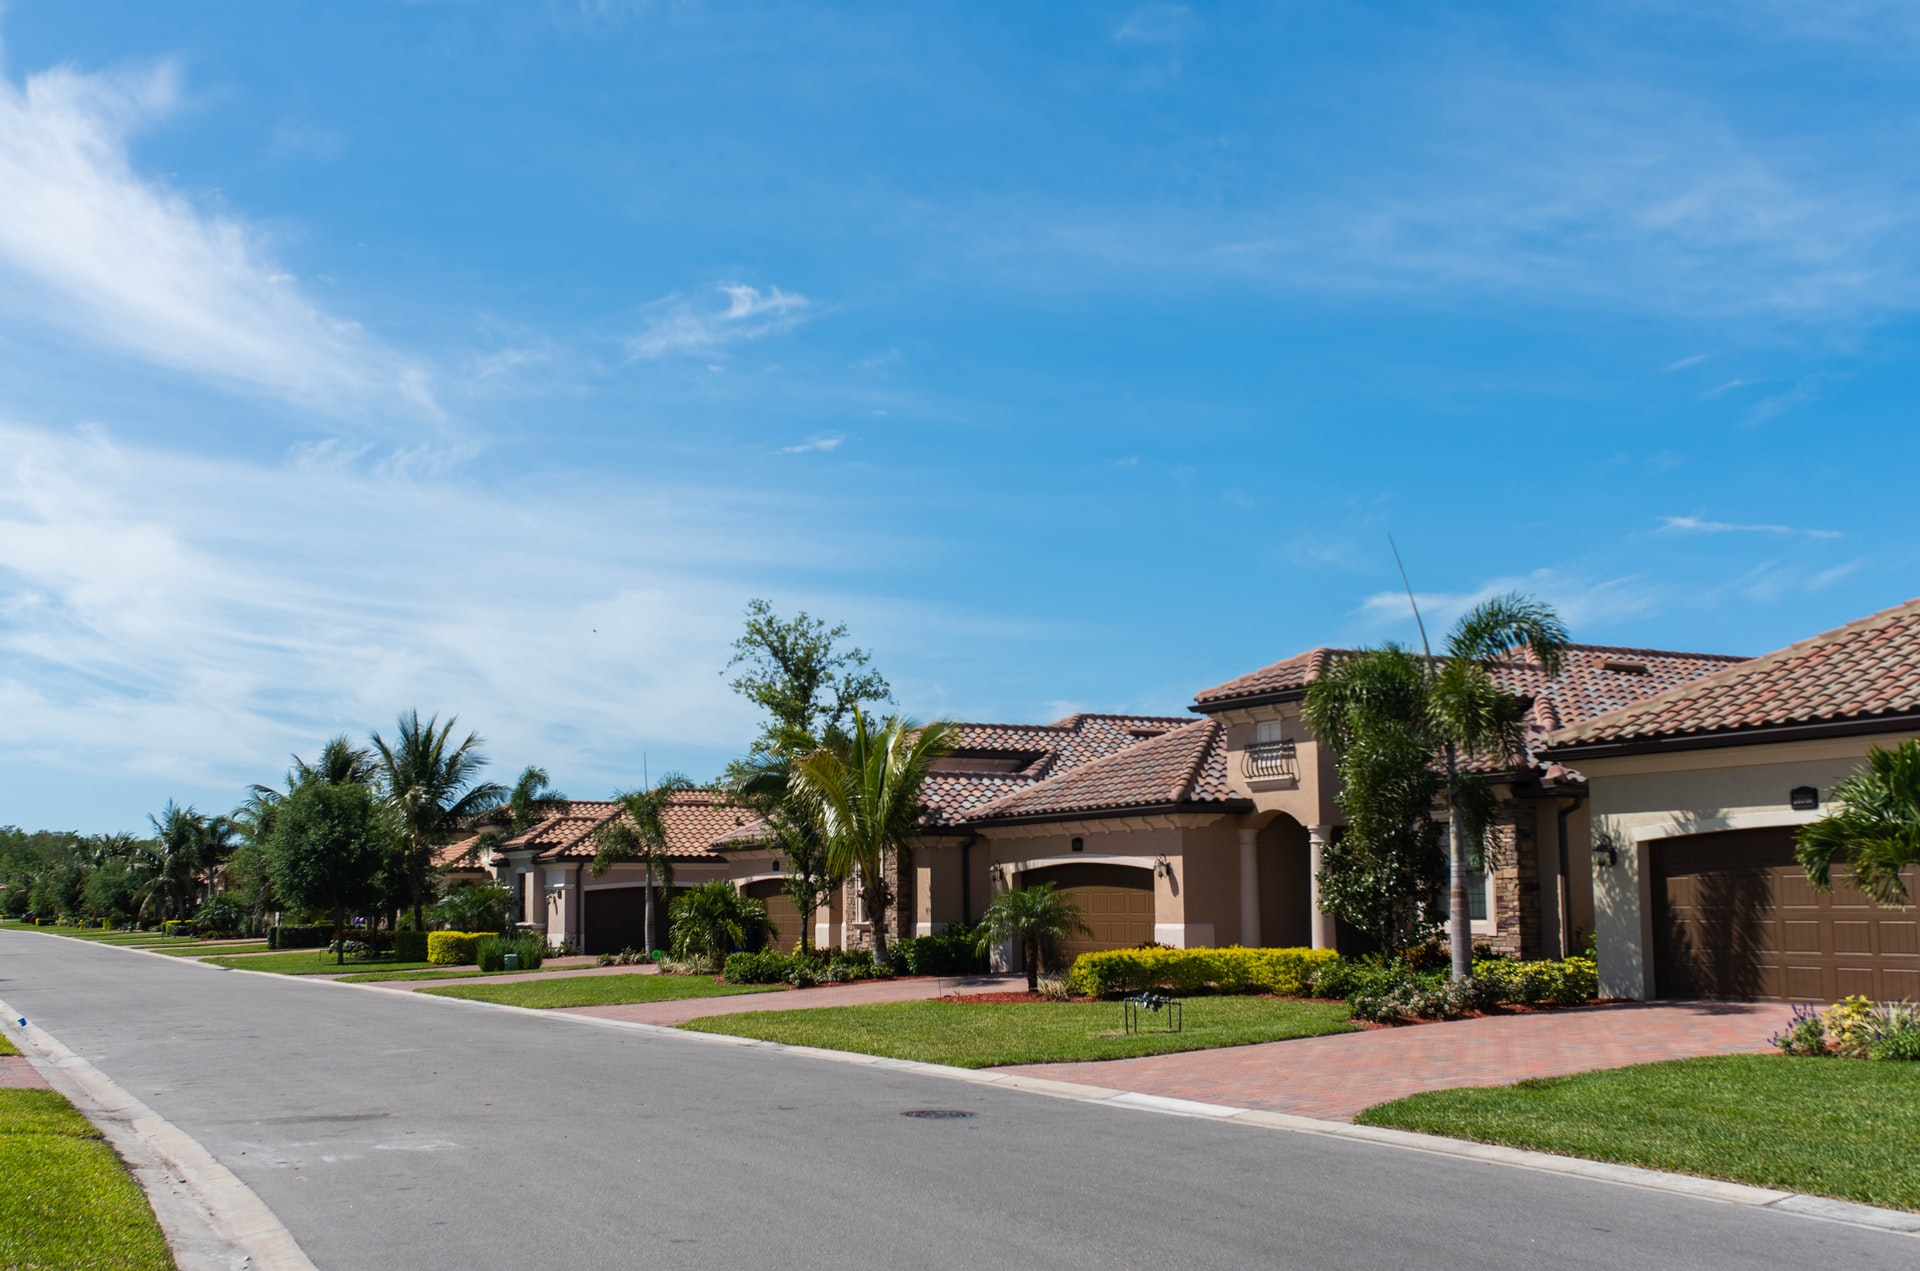 Real Estate Markets in Florida Worth a Look'